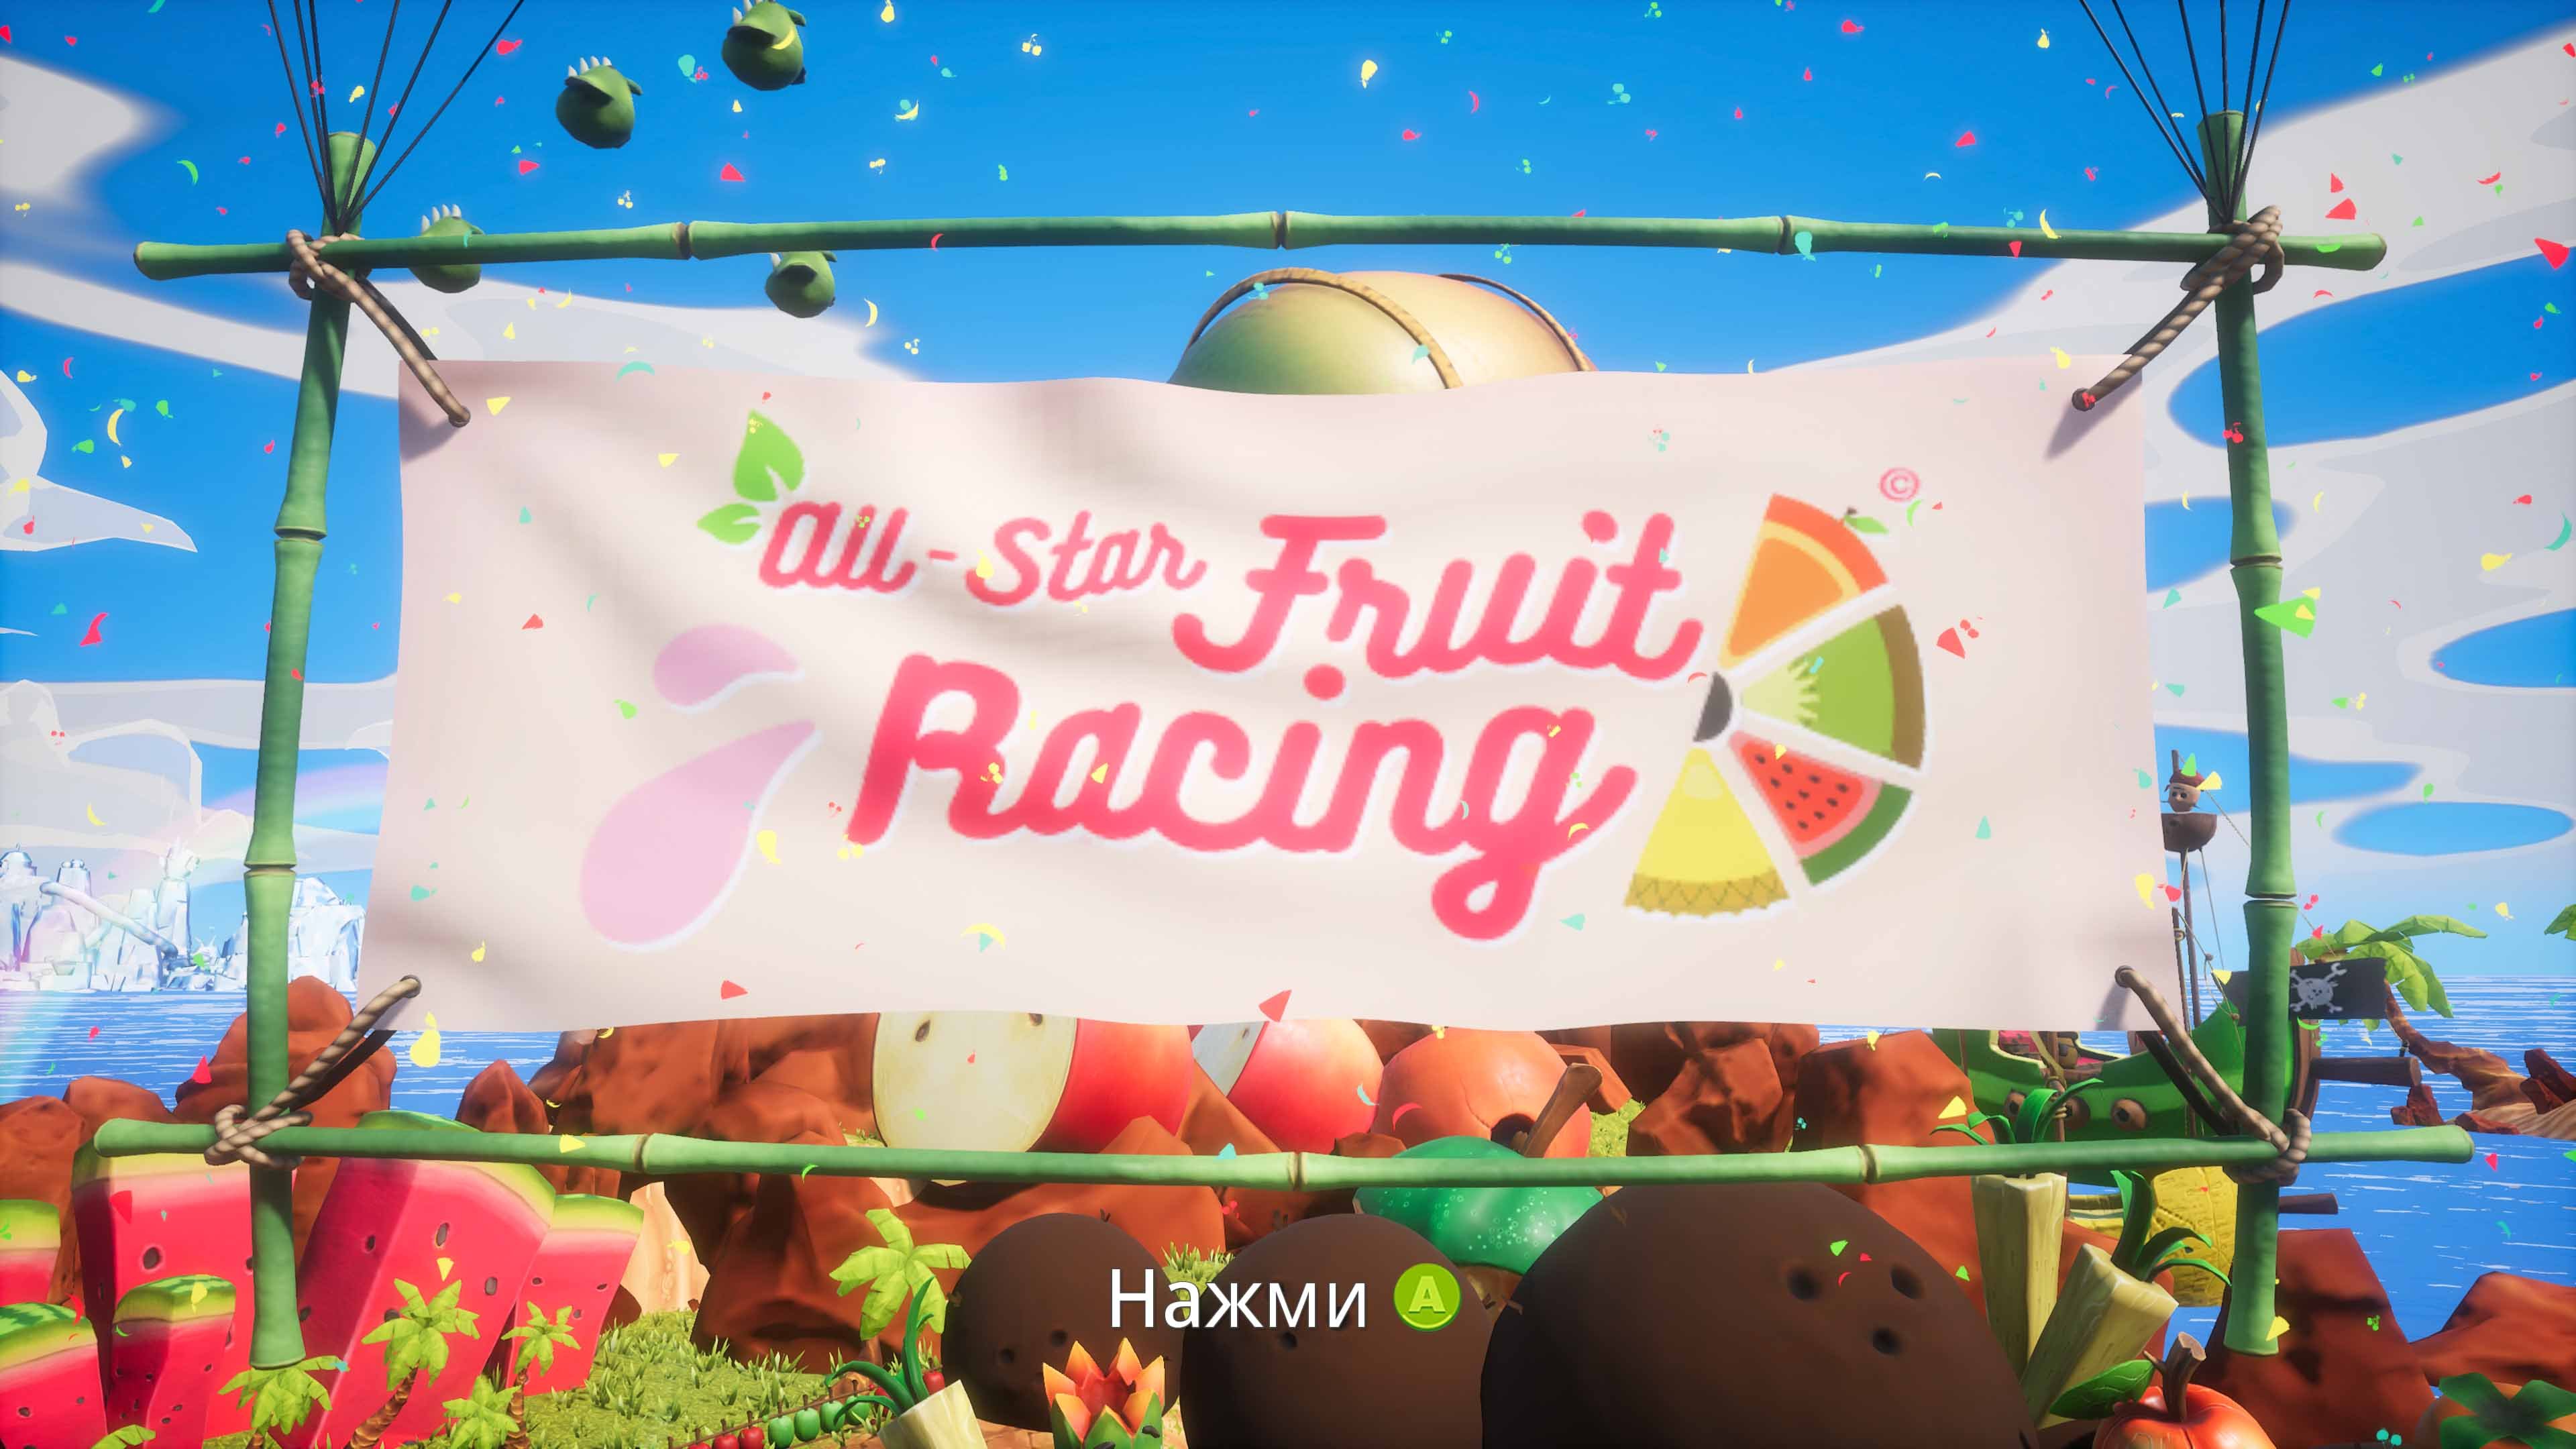 One Fruit Races. All-Star Fruit Racing. Wordwall Fruit Starlight.